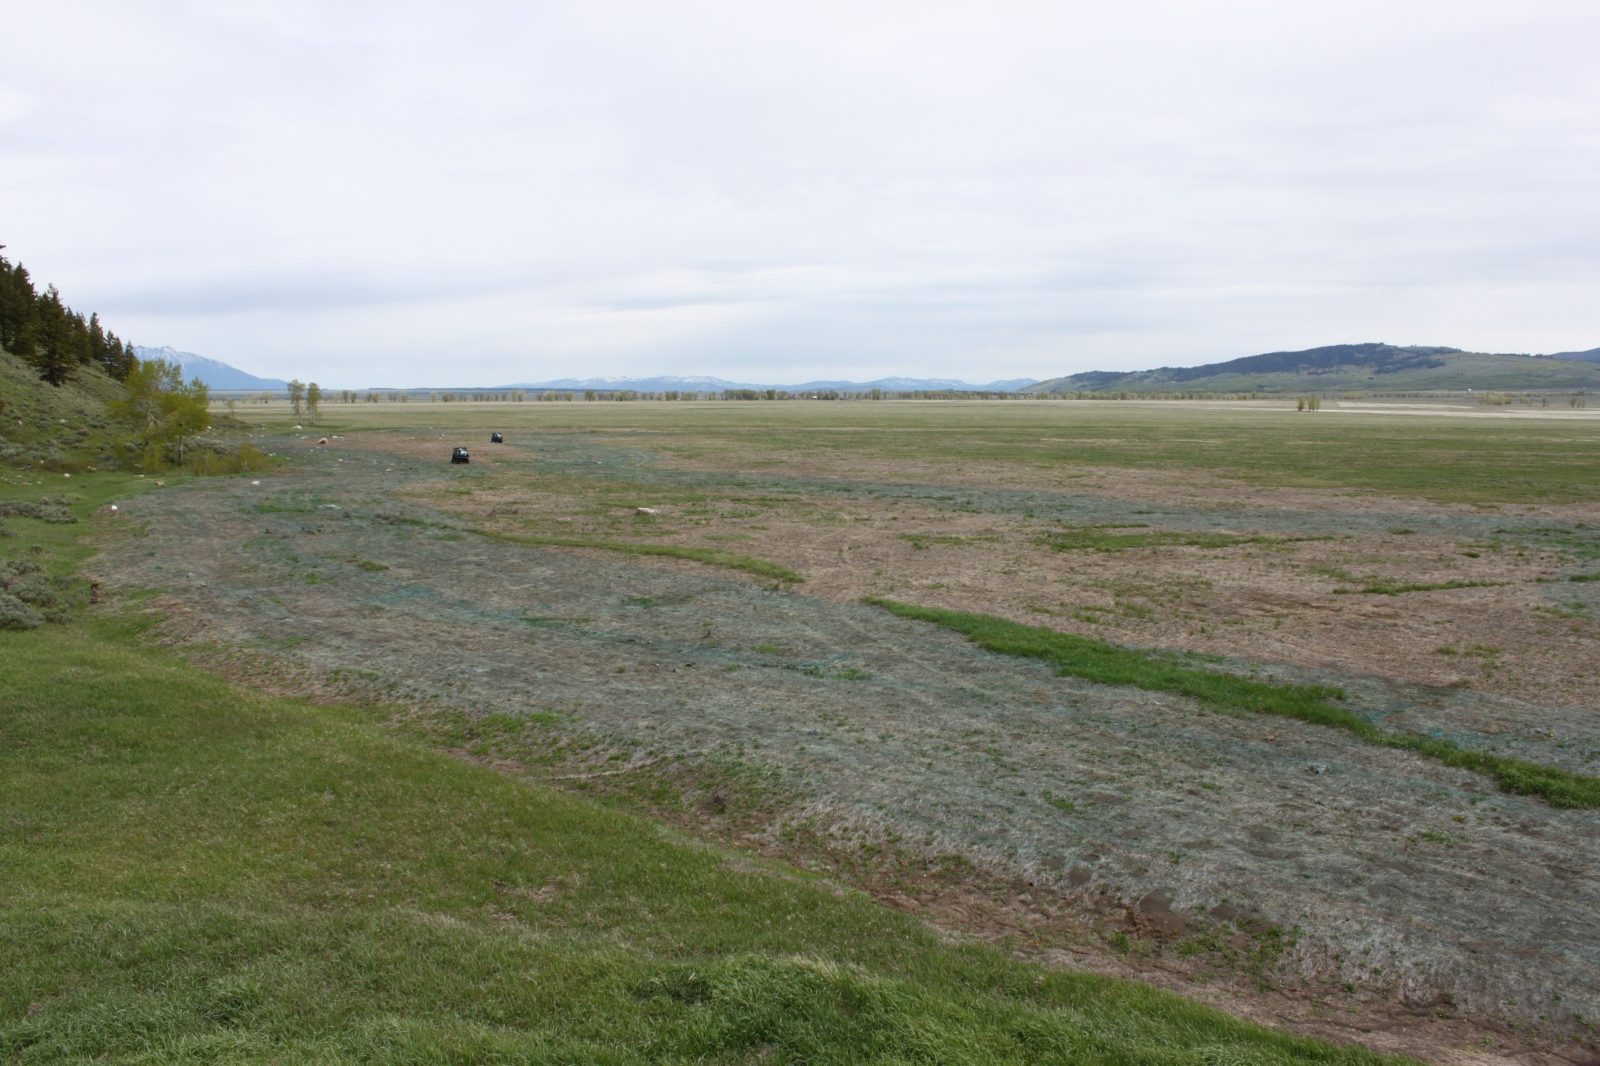 This is a Kelly Hayfields plot in the initial phase of restoration, the smooth brome has been killed to make way for native plants.